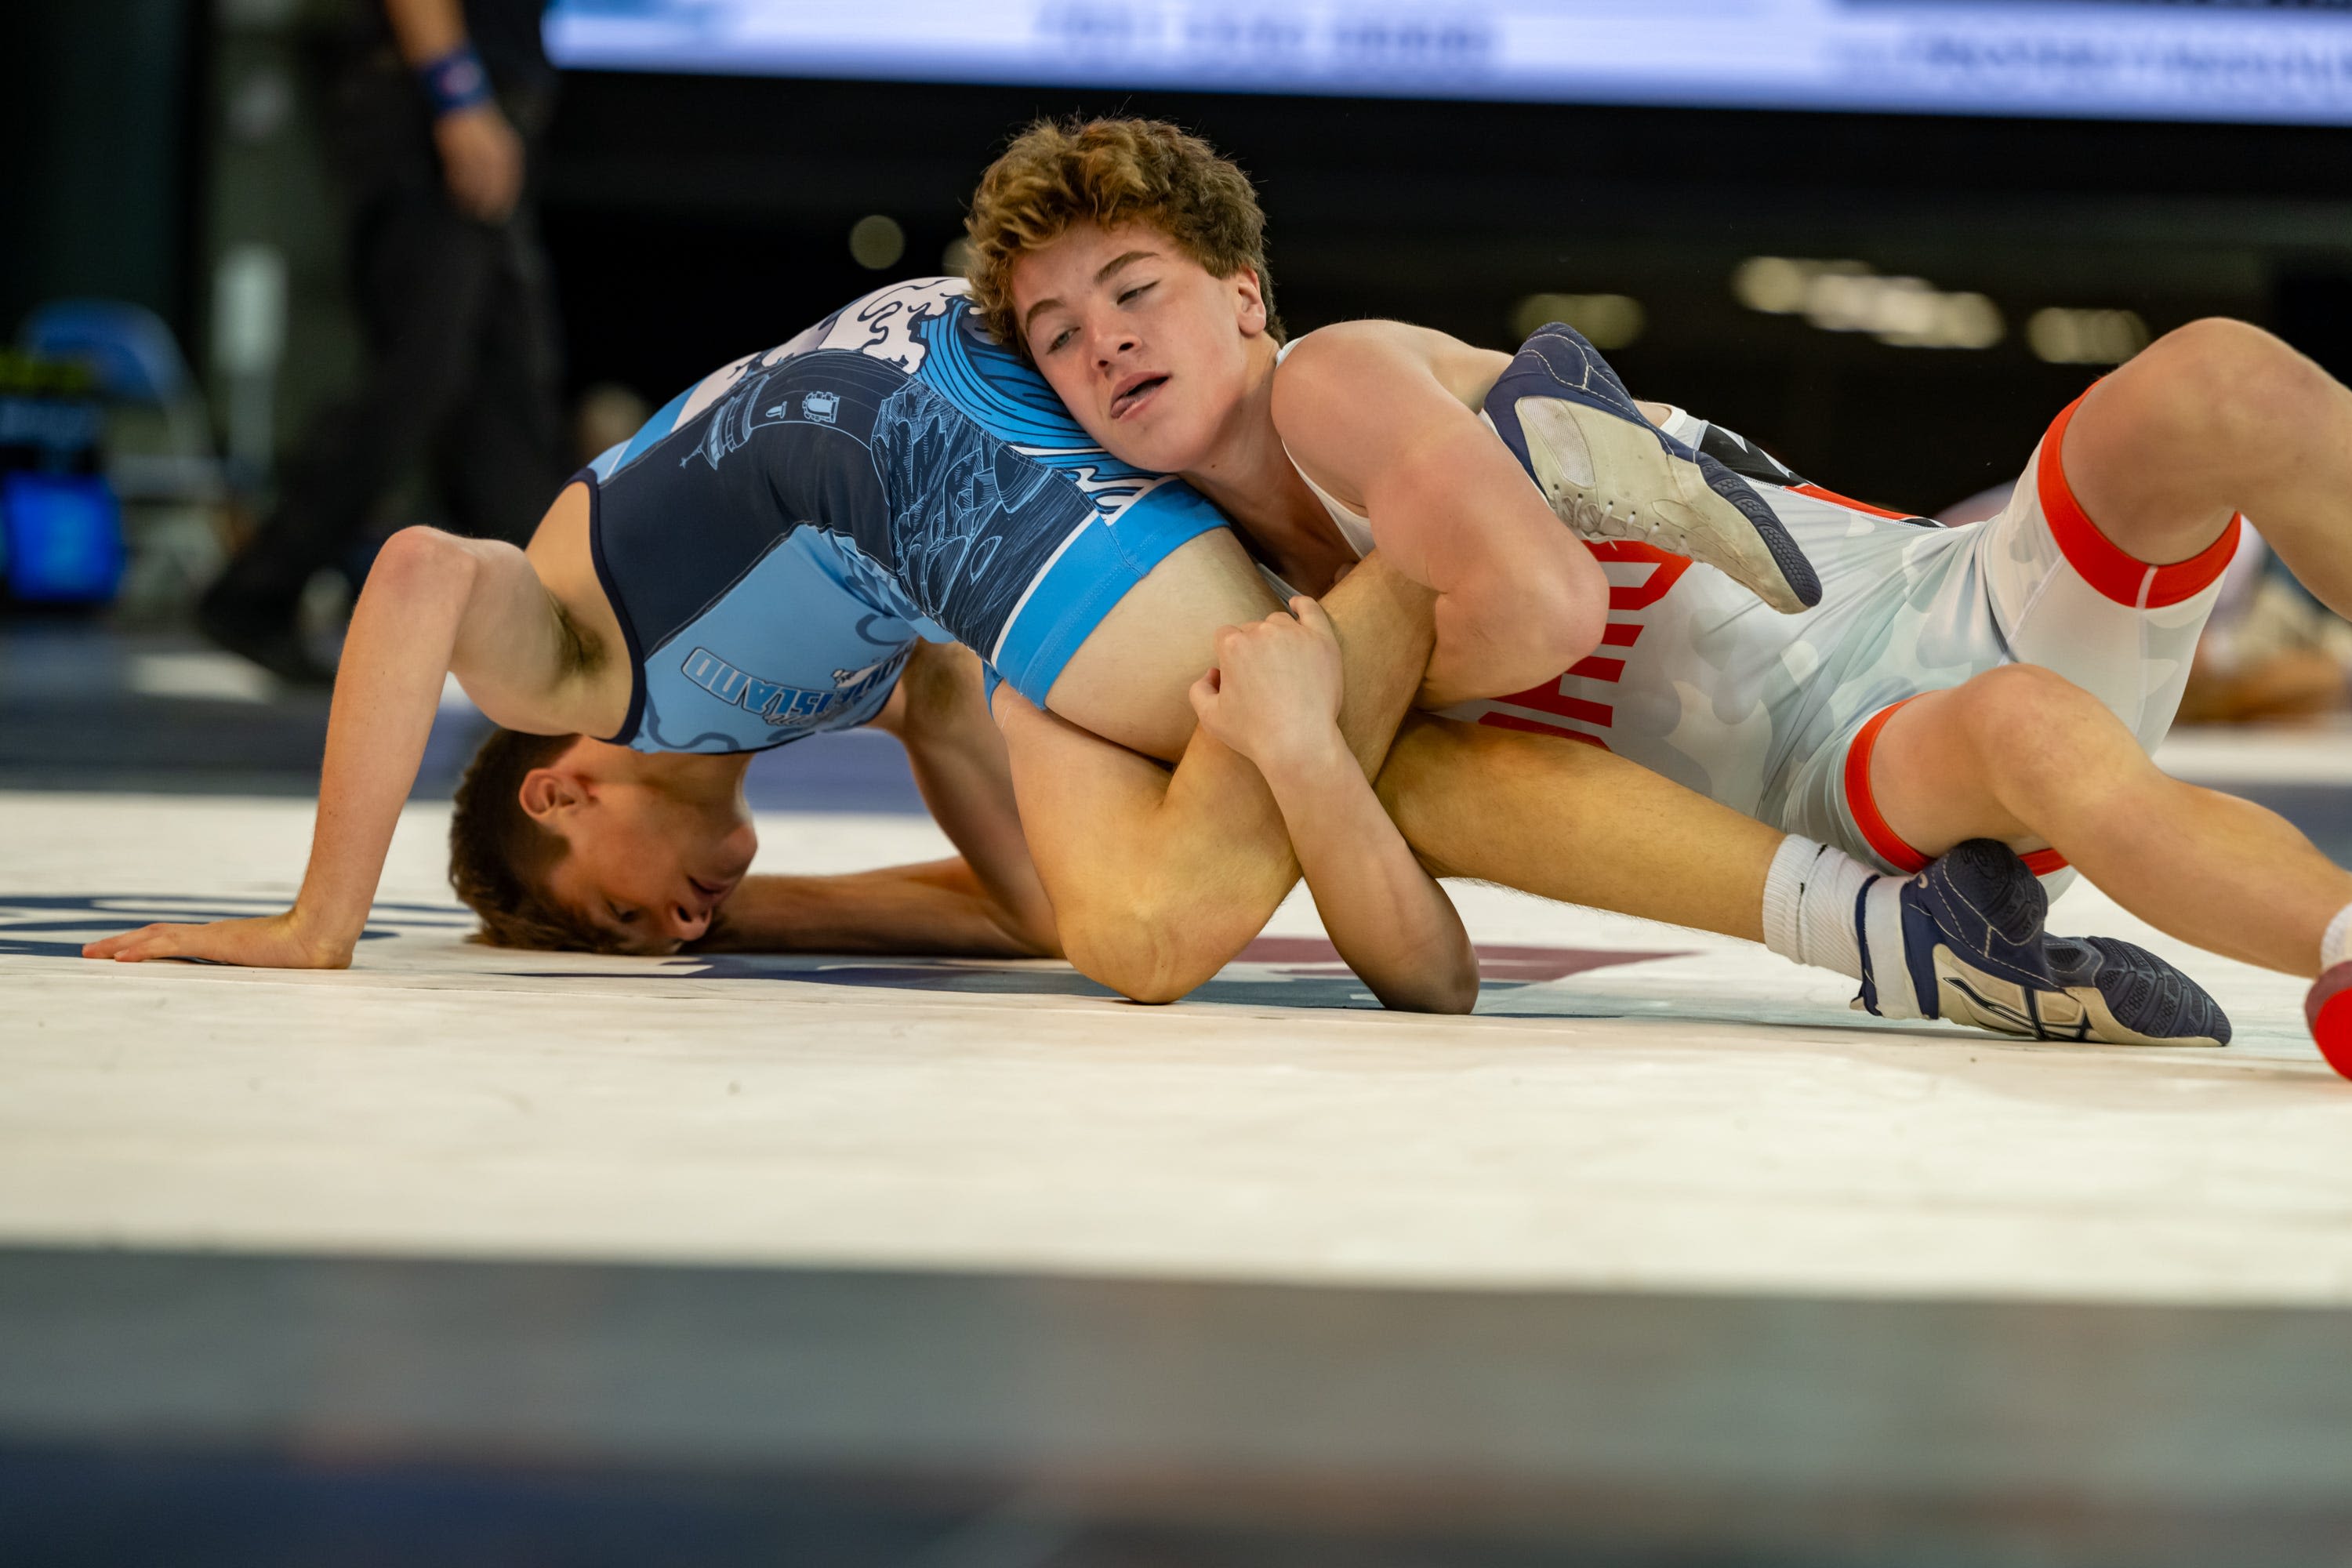 15 area wrestlers are on the same career path as Olympic greats Kyle Snyder, Gable Steveson